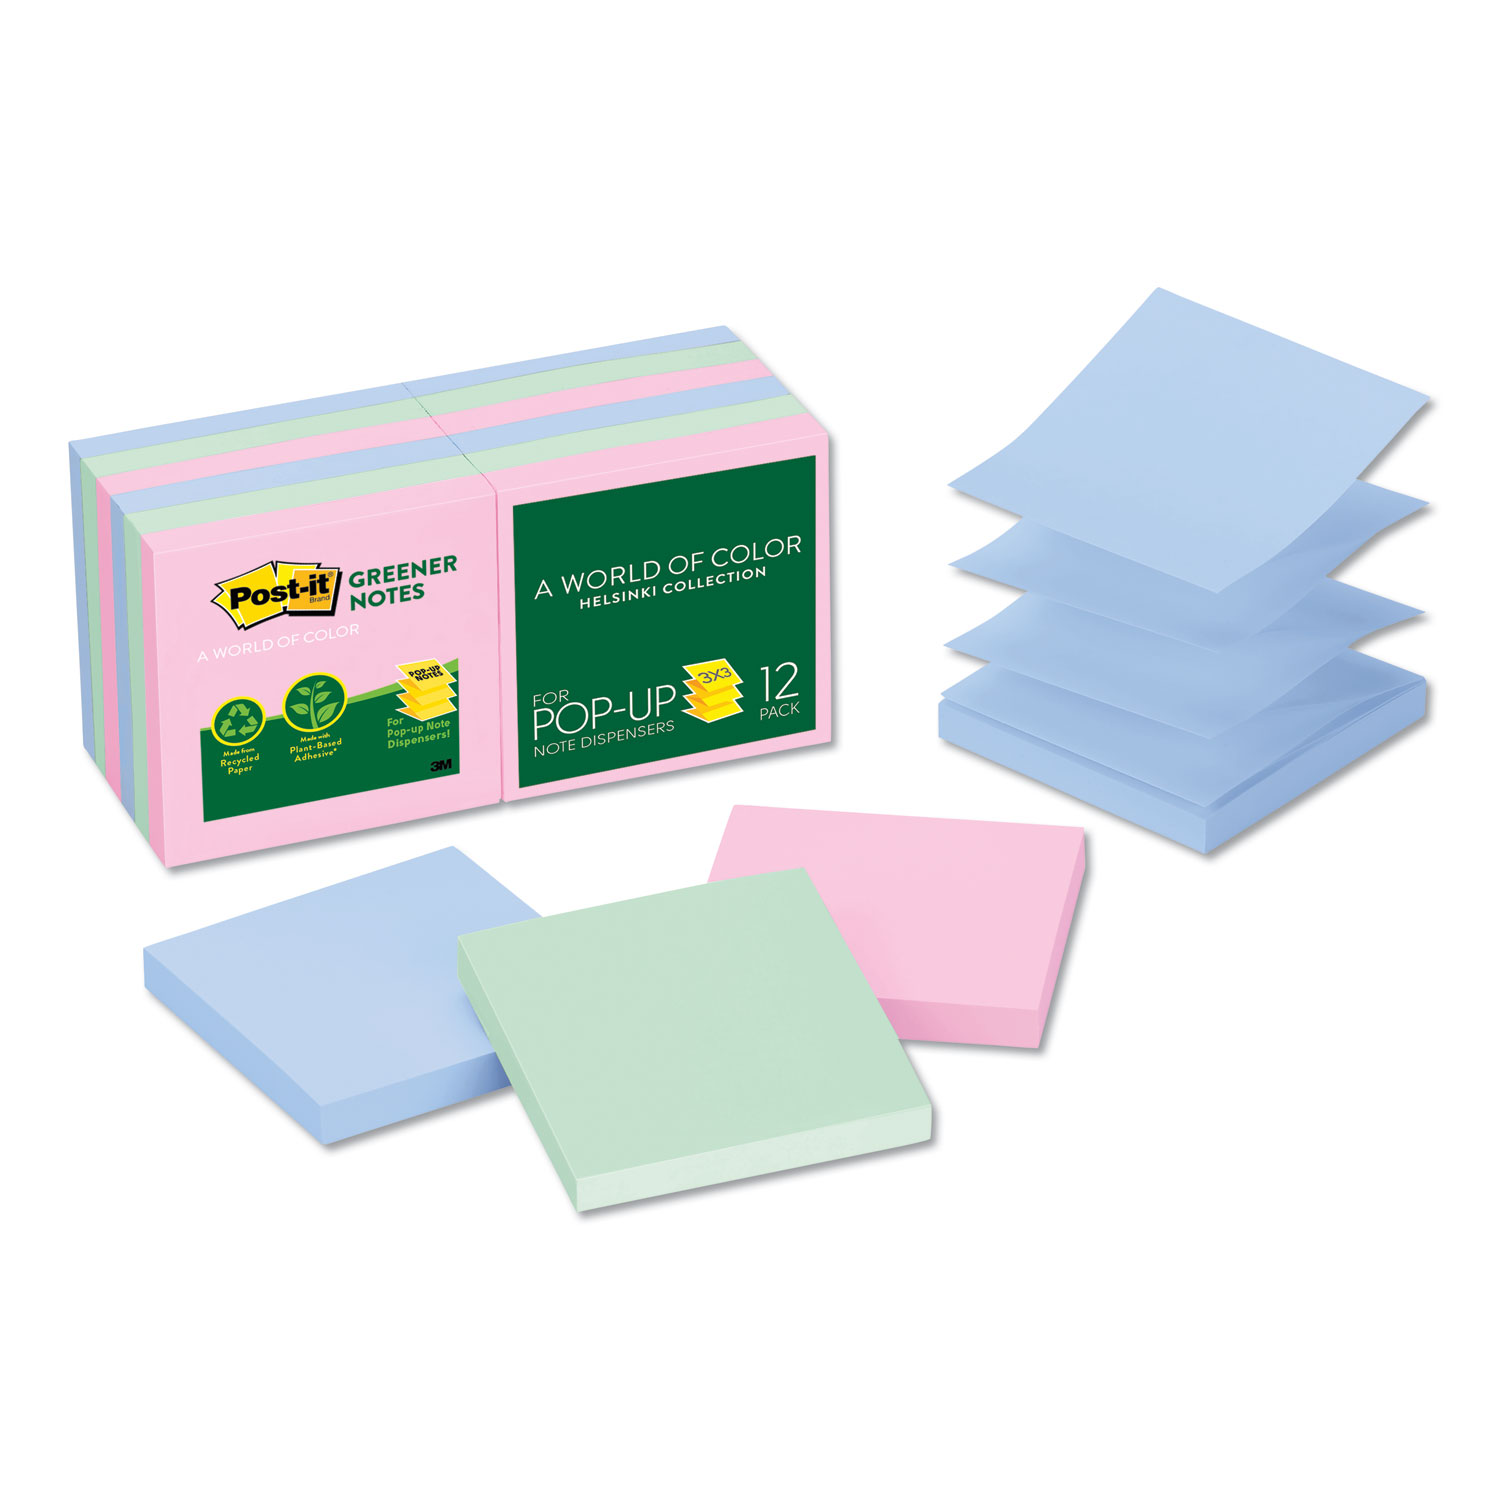  Post-it Greener Notes R330RP-12AP Recycled Pop-up Notes, 3 x 3, Assorted Helsinki Colors, 100-Sheet, 12/Pack (MMMR330RP12AP) 